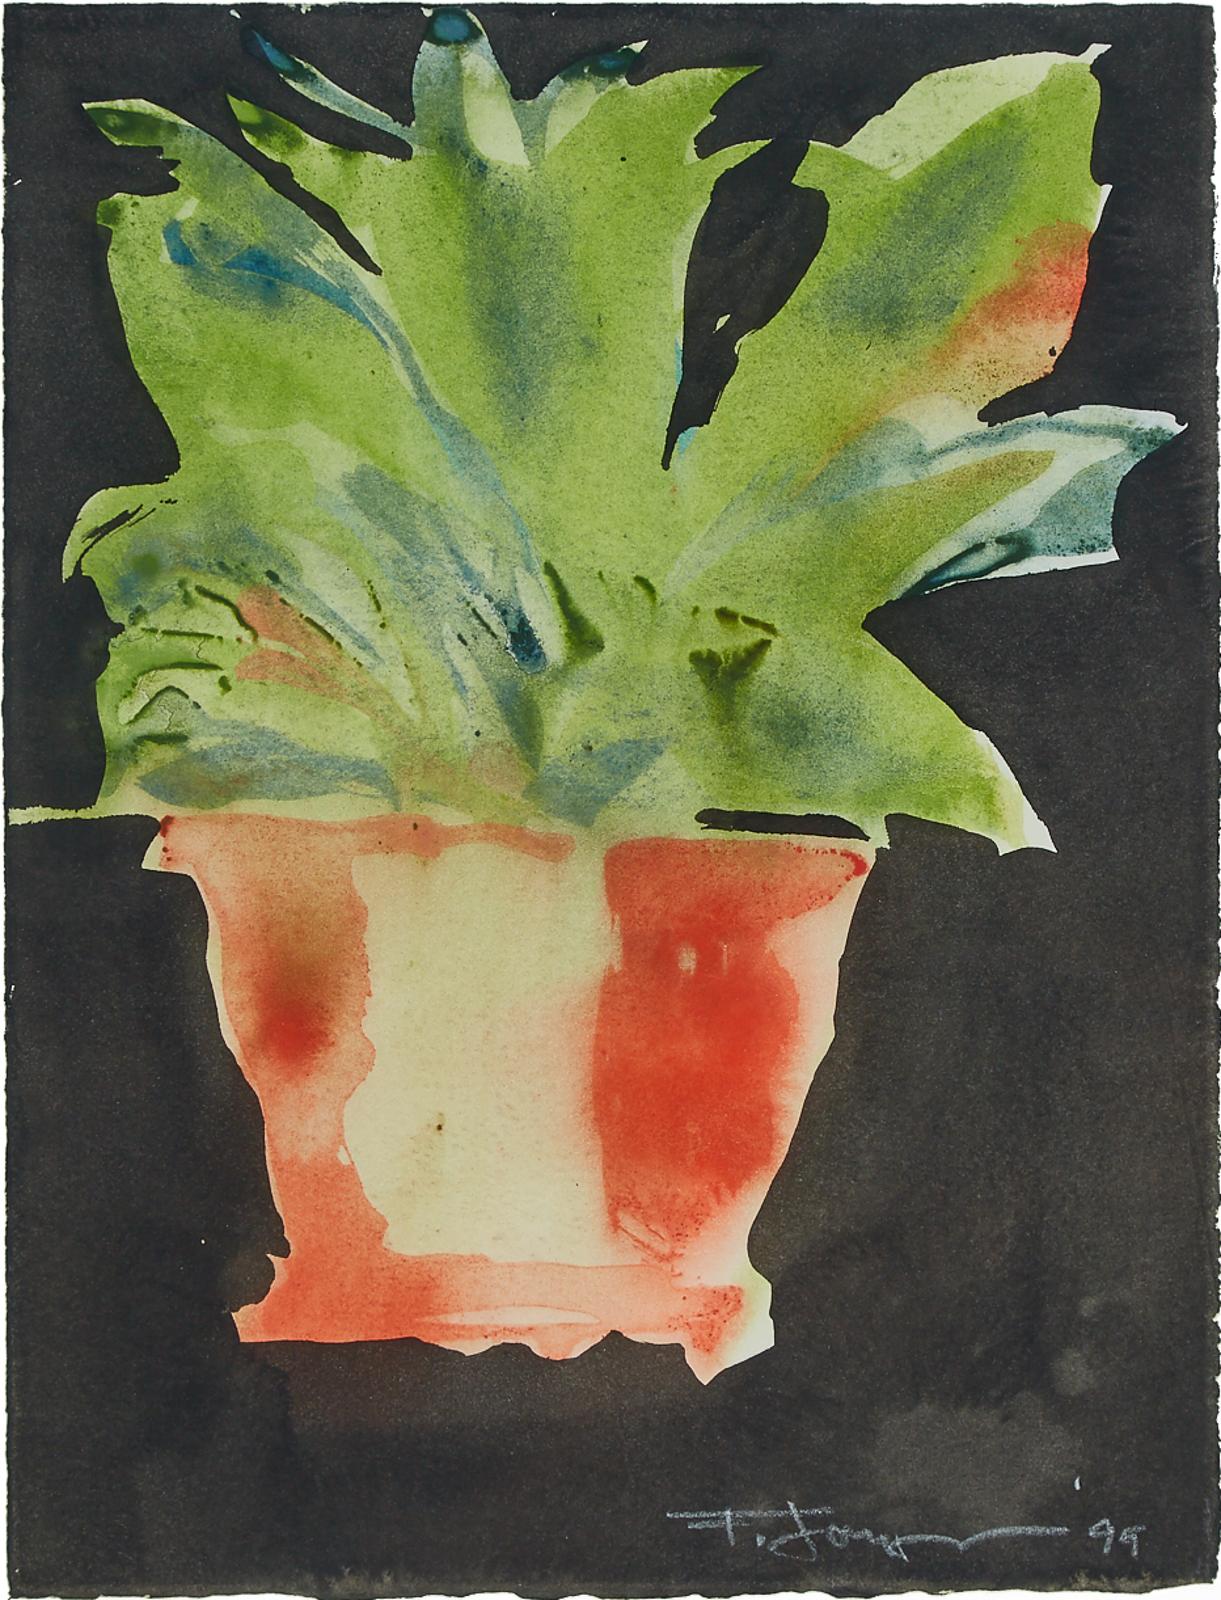 Flemming Jorgensen (1934-2009) - Two Still Lives With Plants, 1999